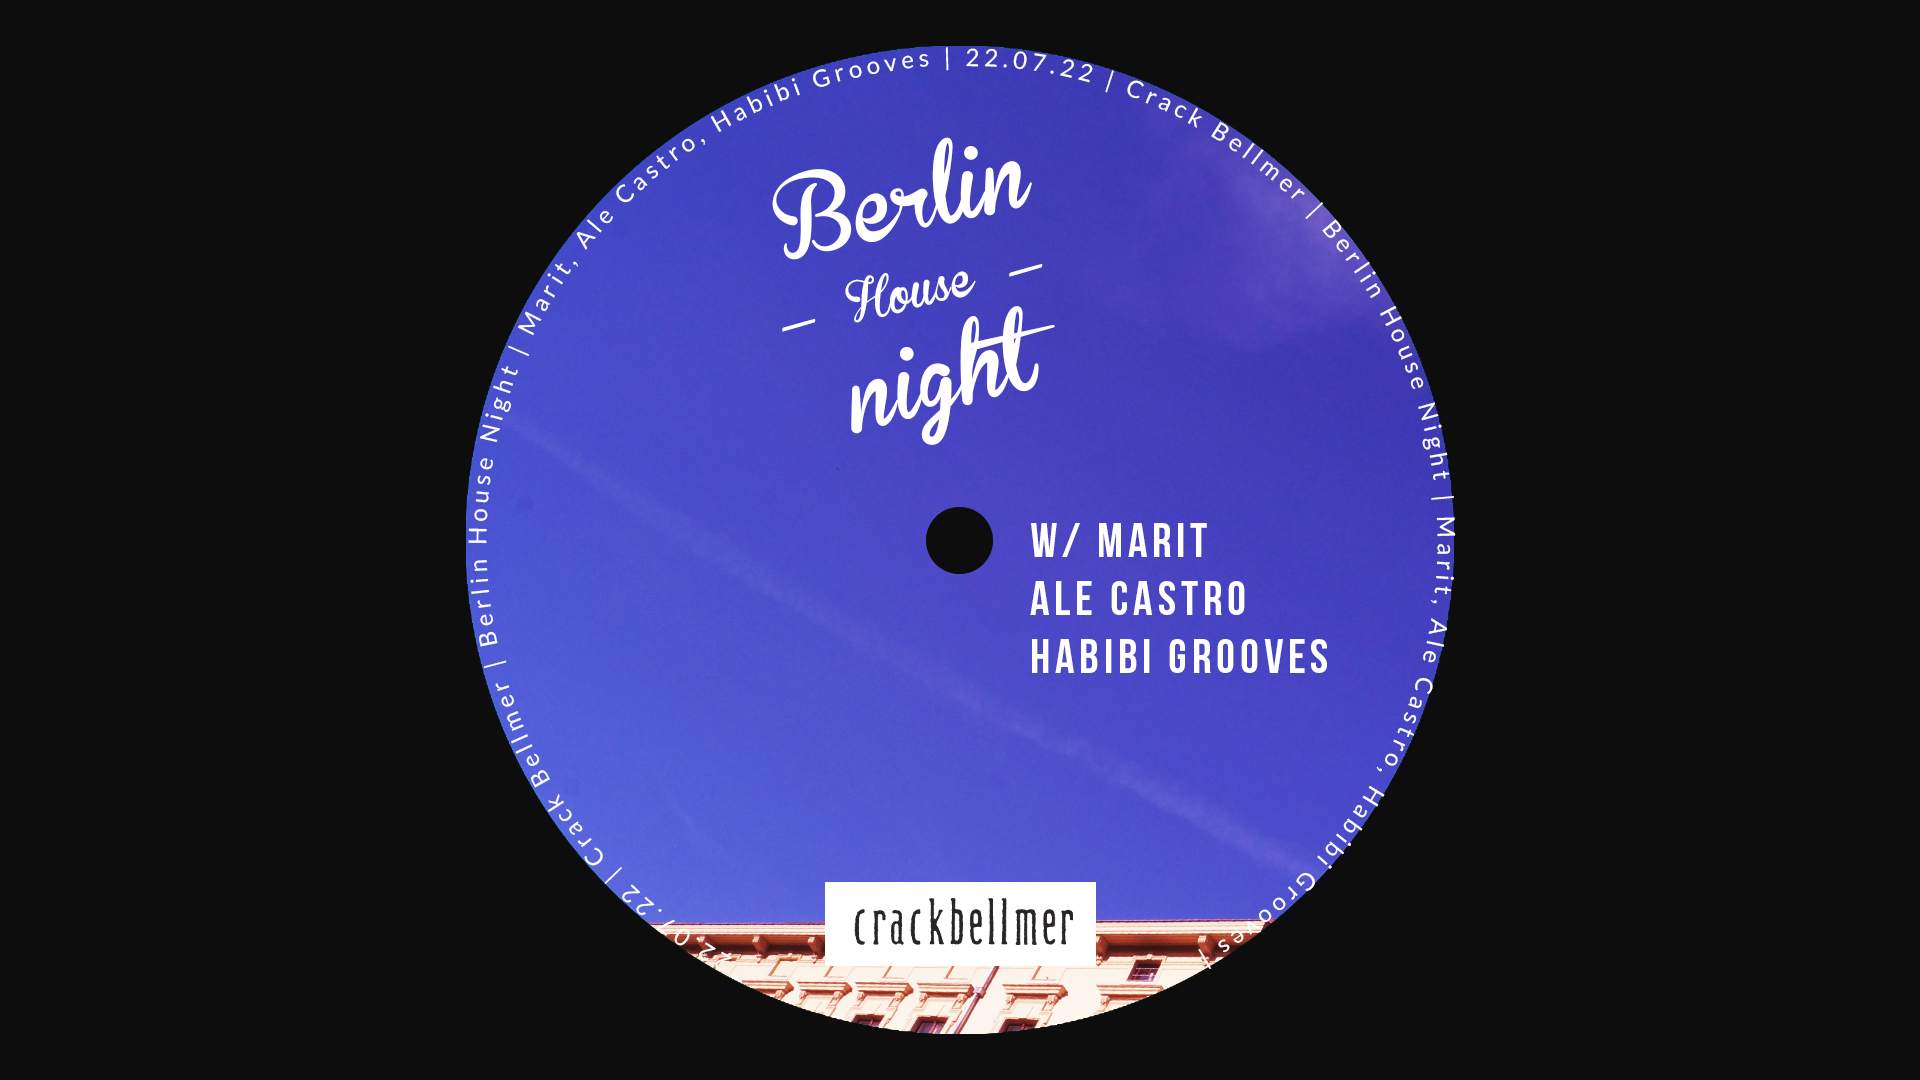 Berlin House Night with Marit, Ale Castro, Habibi Grooves - フライヤー表